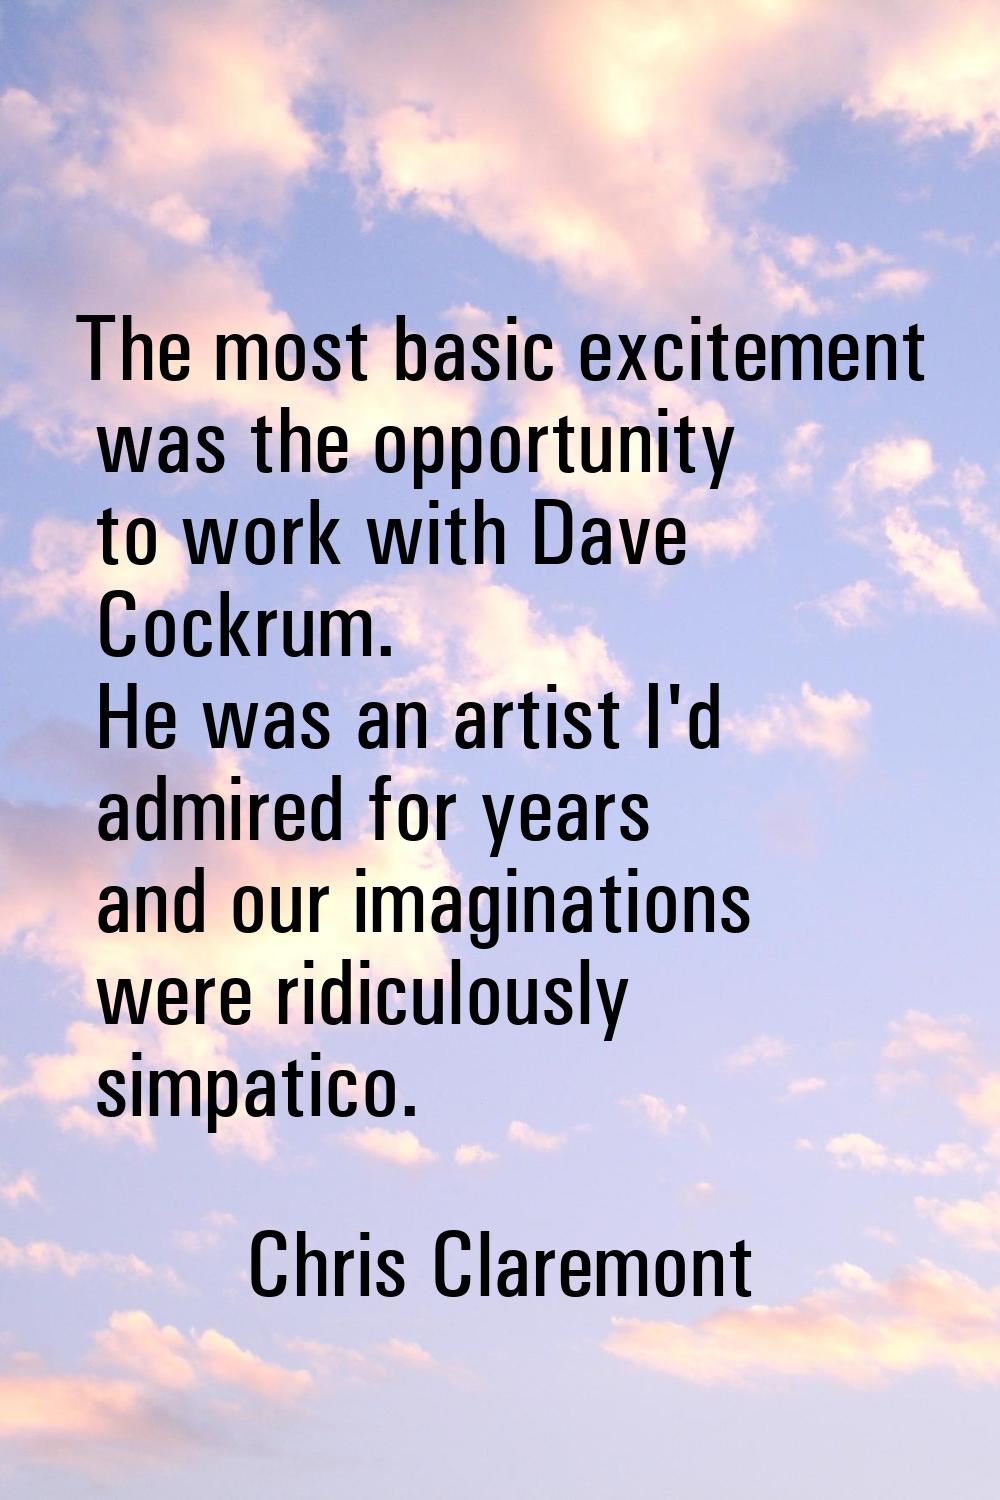 The most basic excitement was the opportunity to work with Dave Cockrum. He was an artist I'd admir